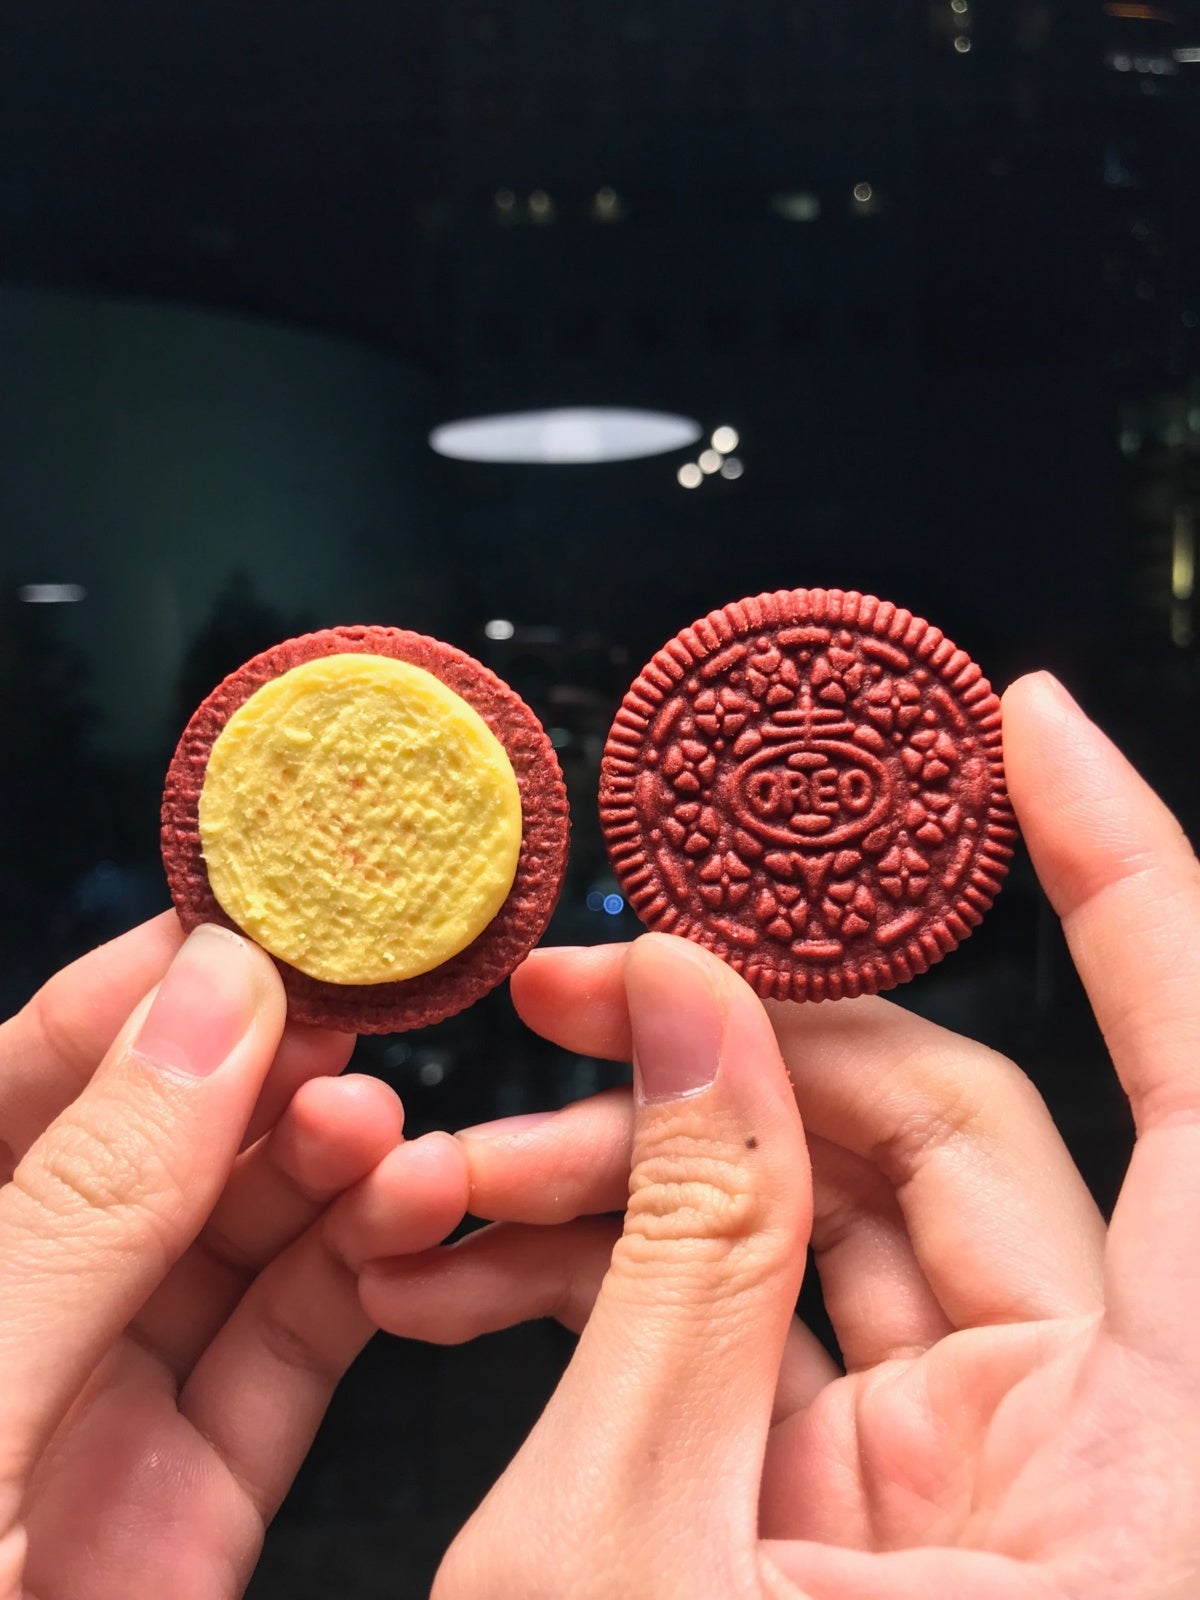 Red Velvet Oreos Are Now Available In 7-Eleven Malaysia And We Tried Them Out! - WORLD OF BUZZ